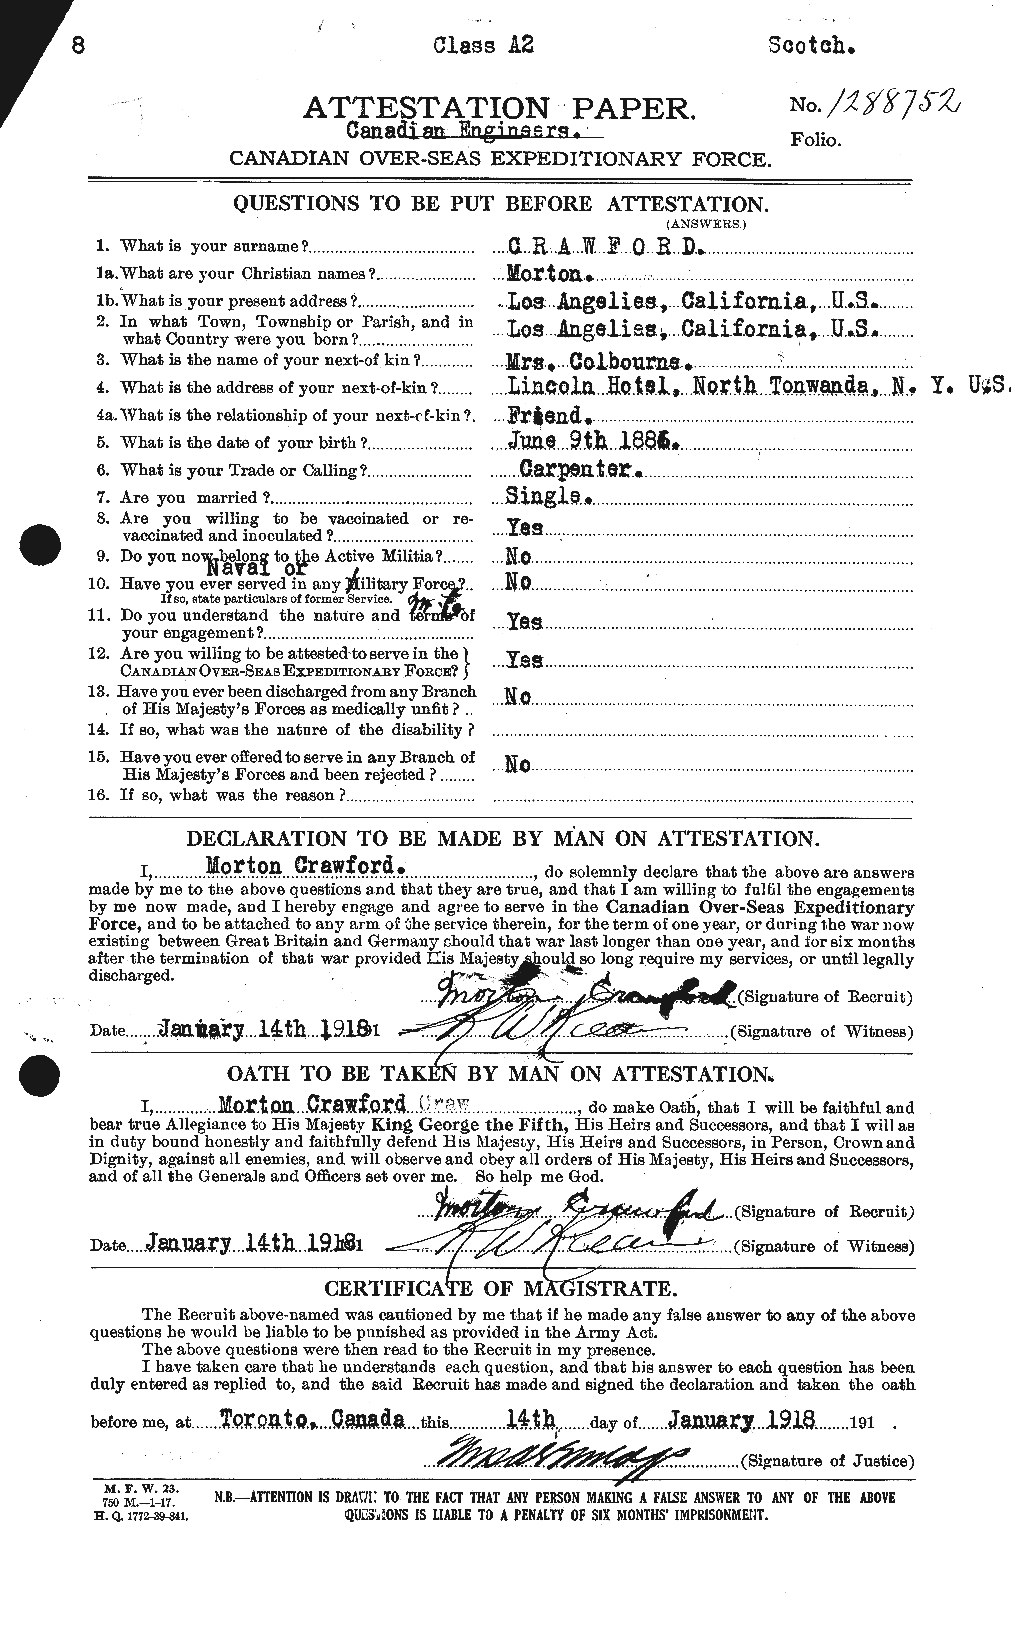 Personnel Records of the First World War - CEF 061666a